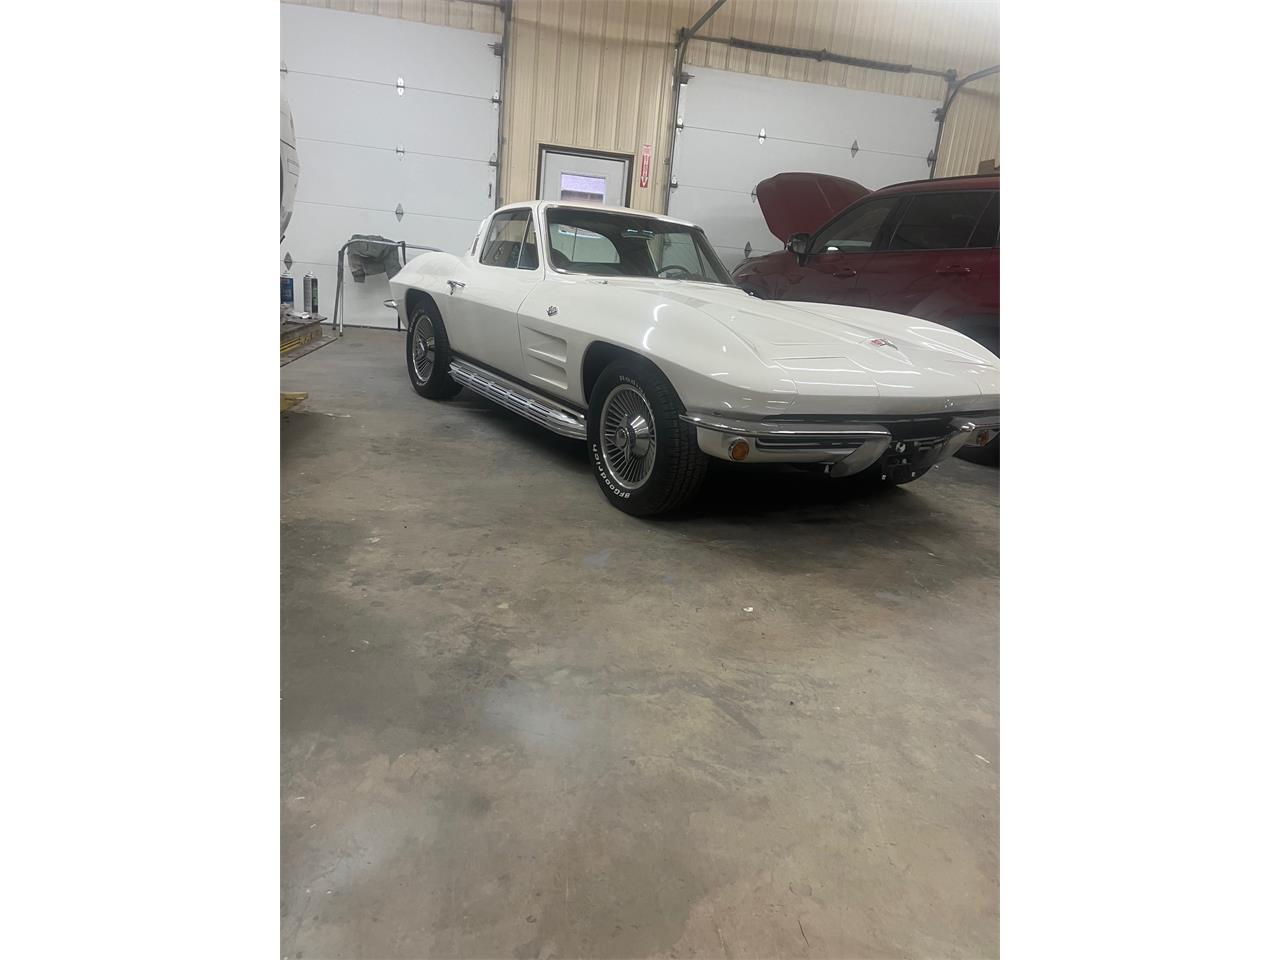 For Sale: 1964 Chevrolet Corvette in MILFORD, Ohio for sale in Milford, OH